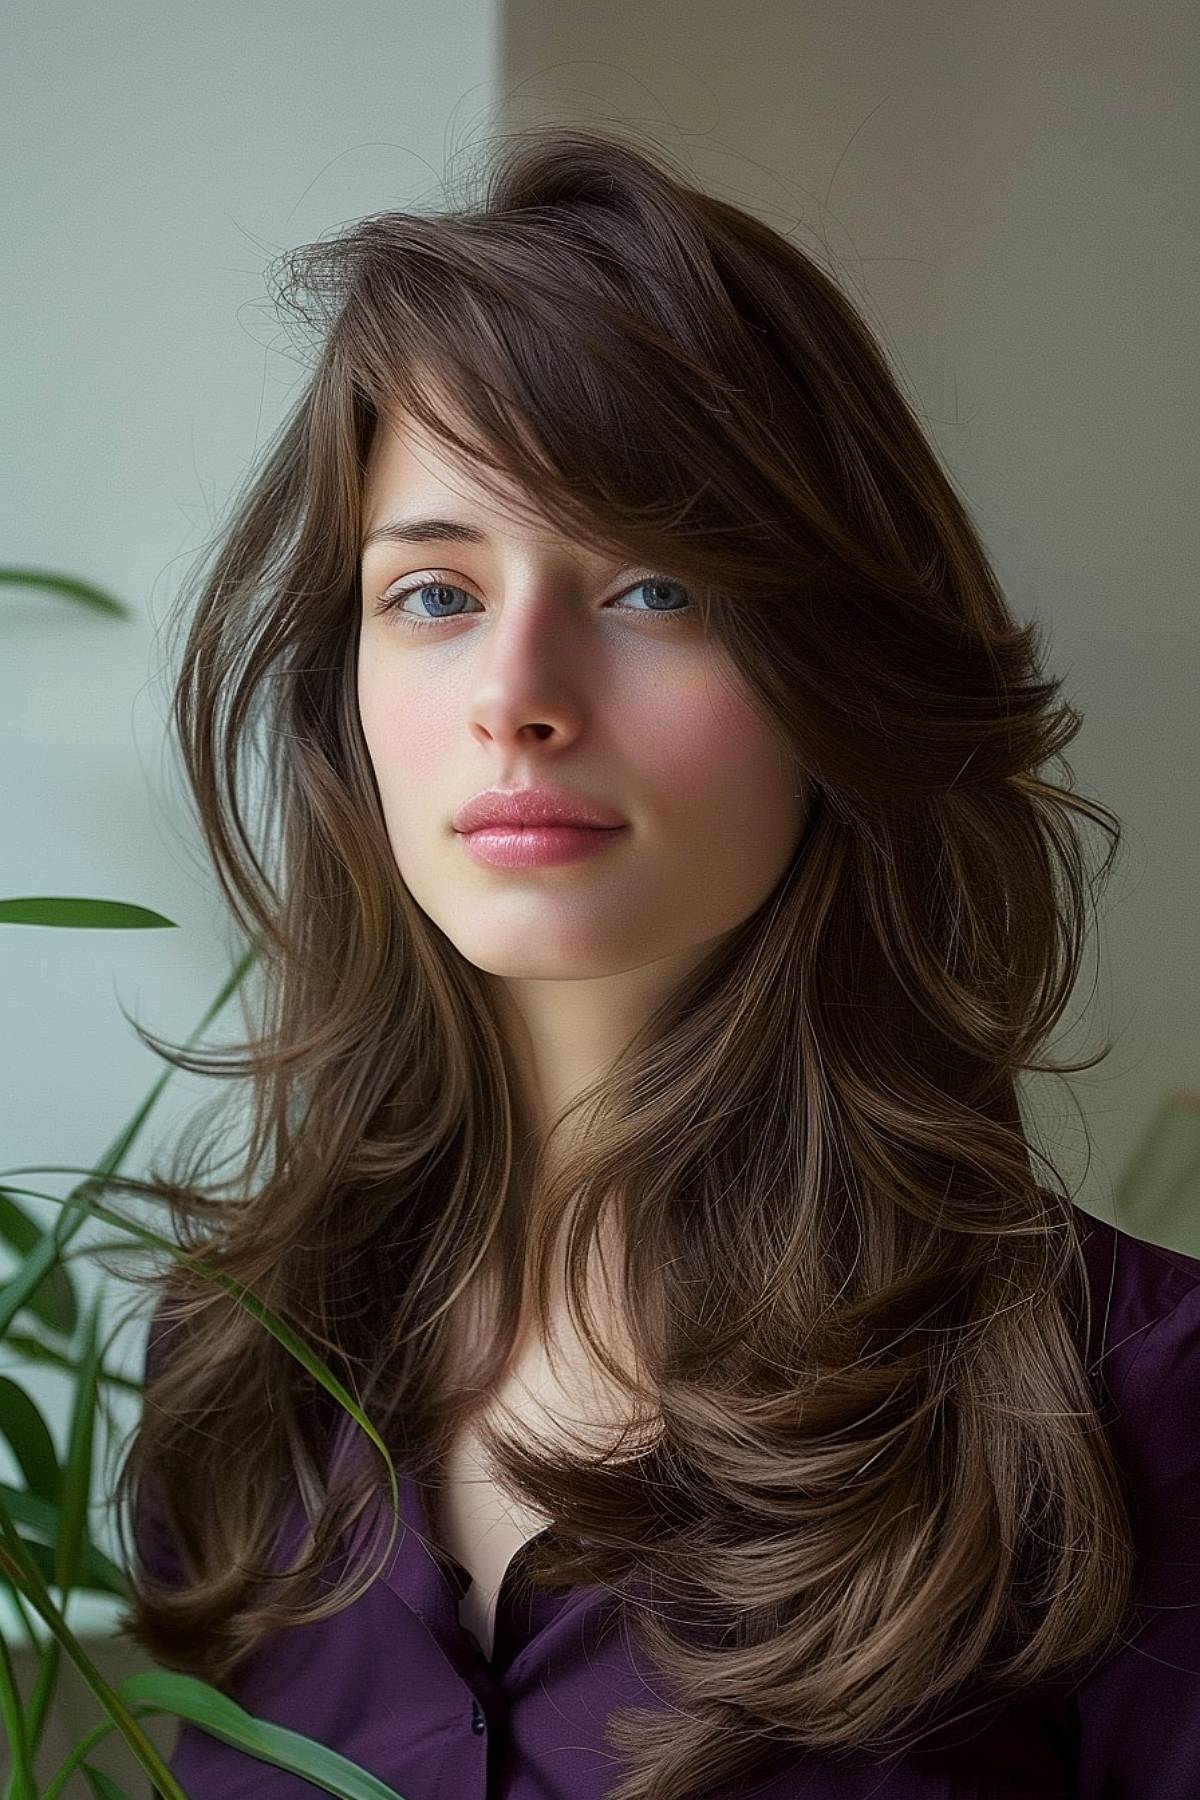 Layered long hair with soft side bangs adds volume and softens the shape of your long face.